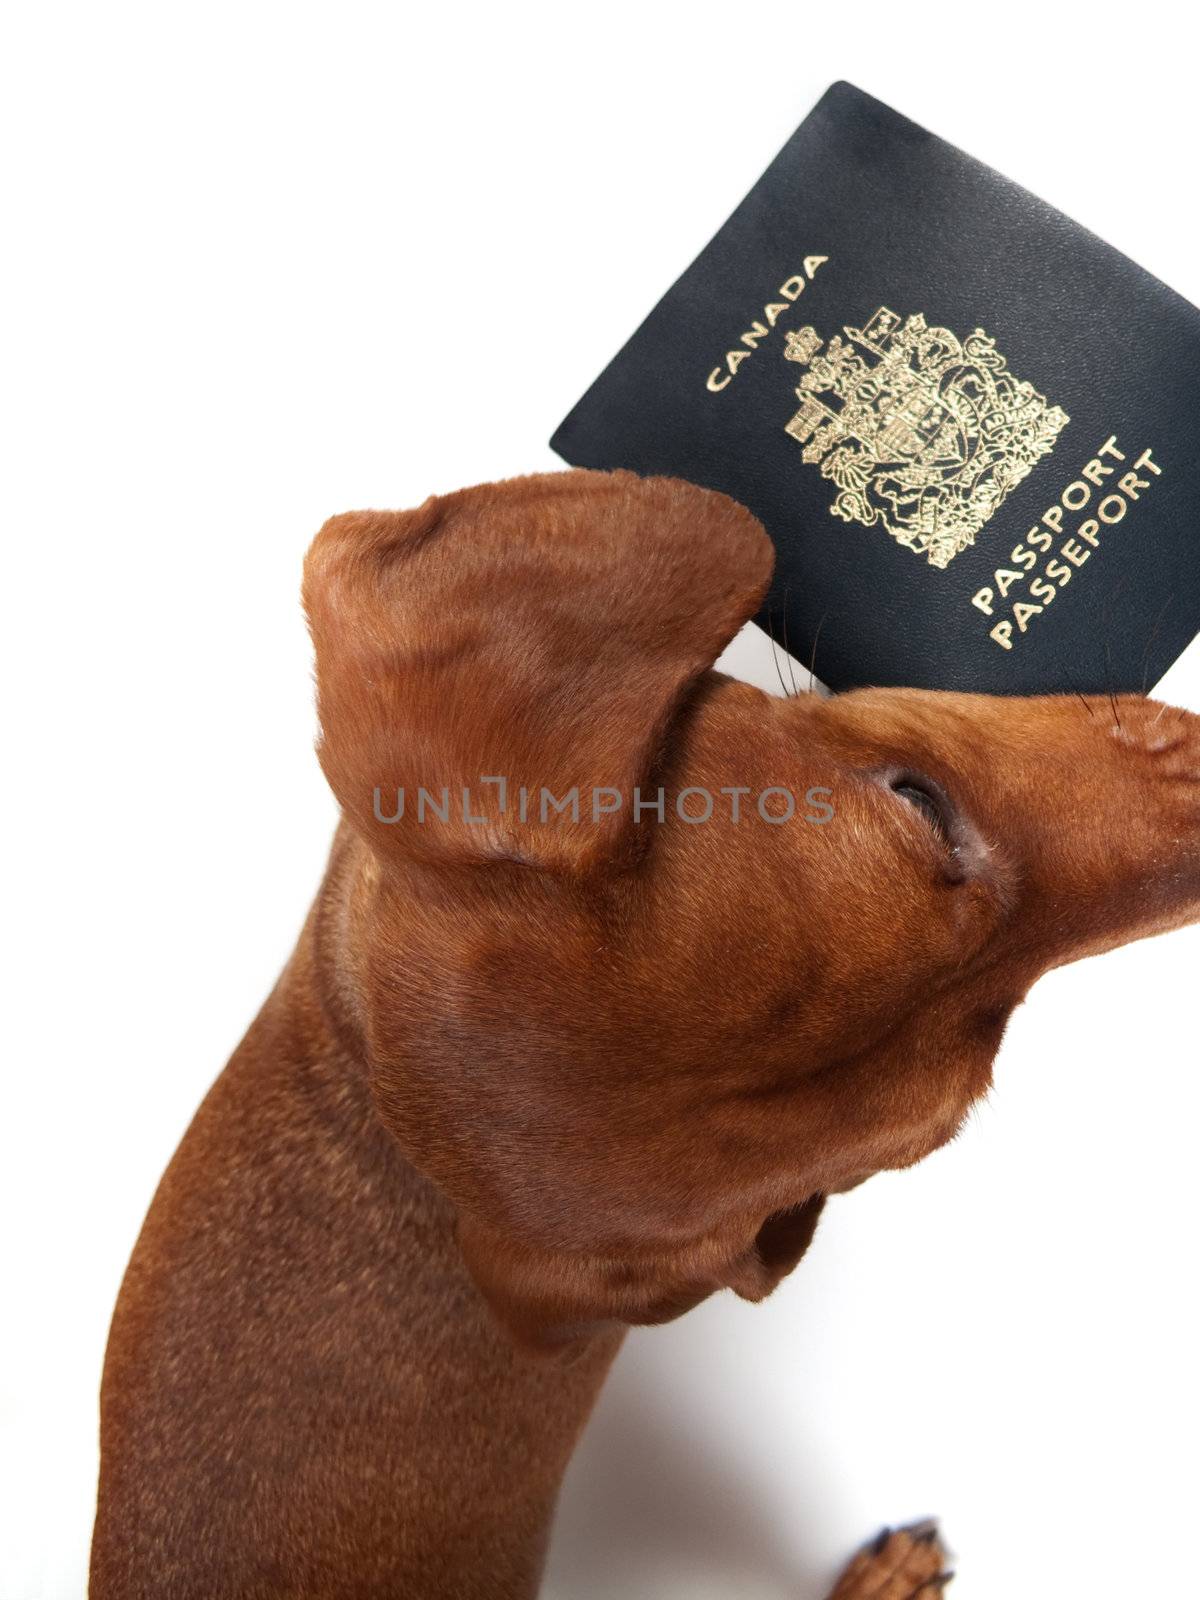 Looking down at a miniature Dachshund, holding a passport in his mouth, isolated on white.